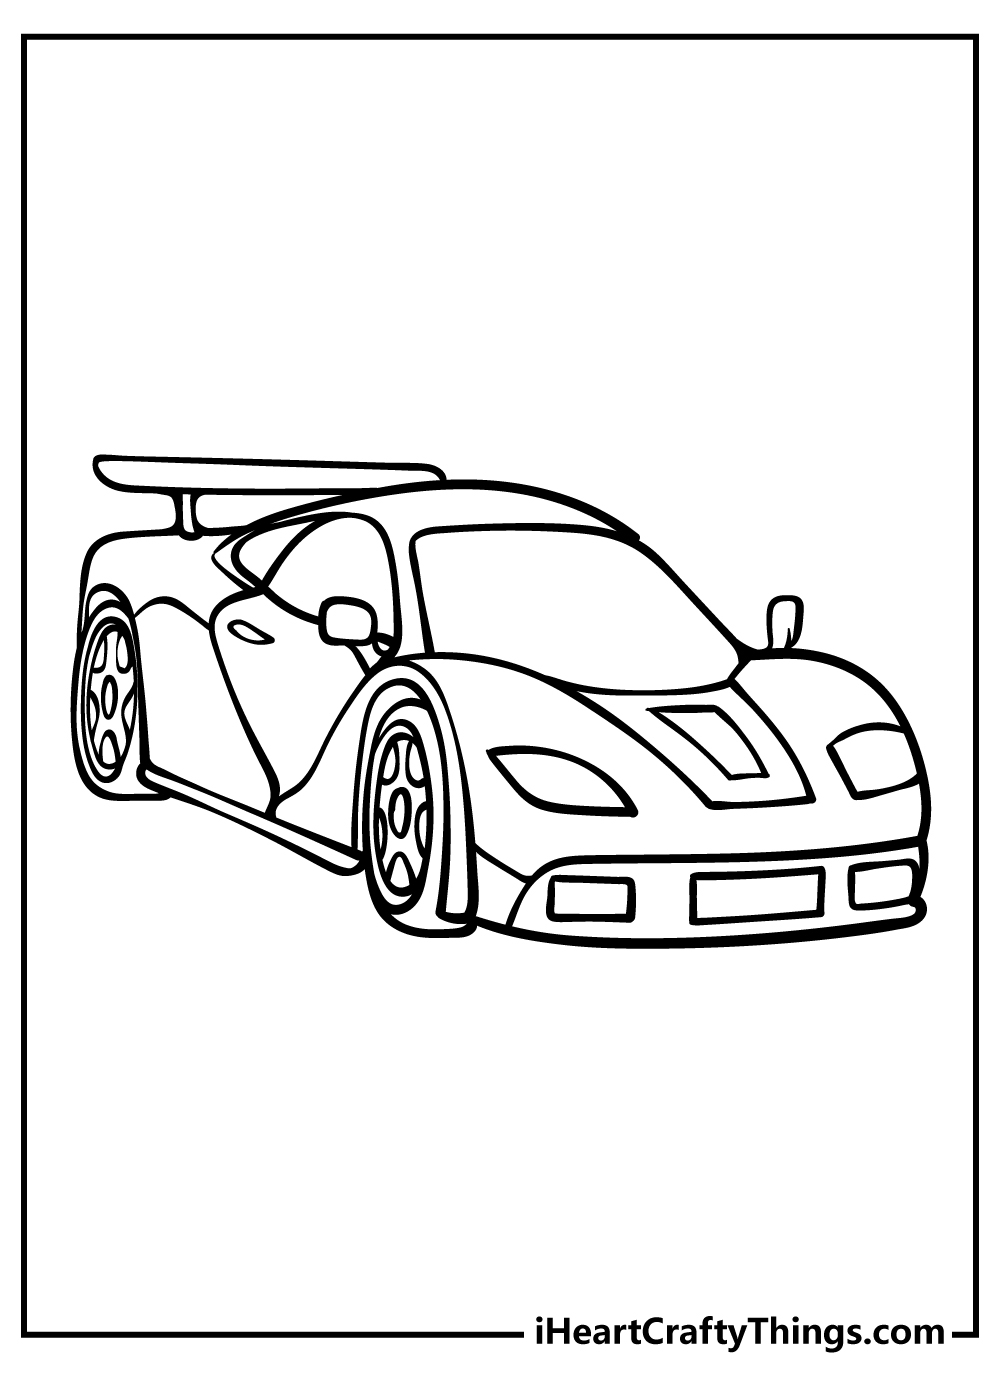 Printable Race Car Coloring Pages (Updated 10) Within Blank Race Car Templates